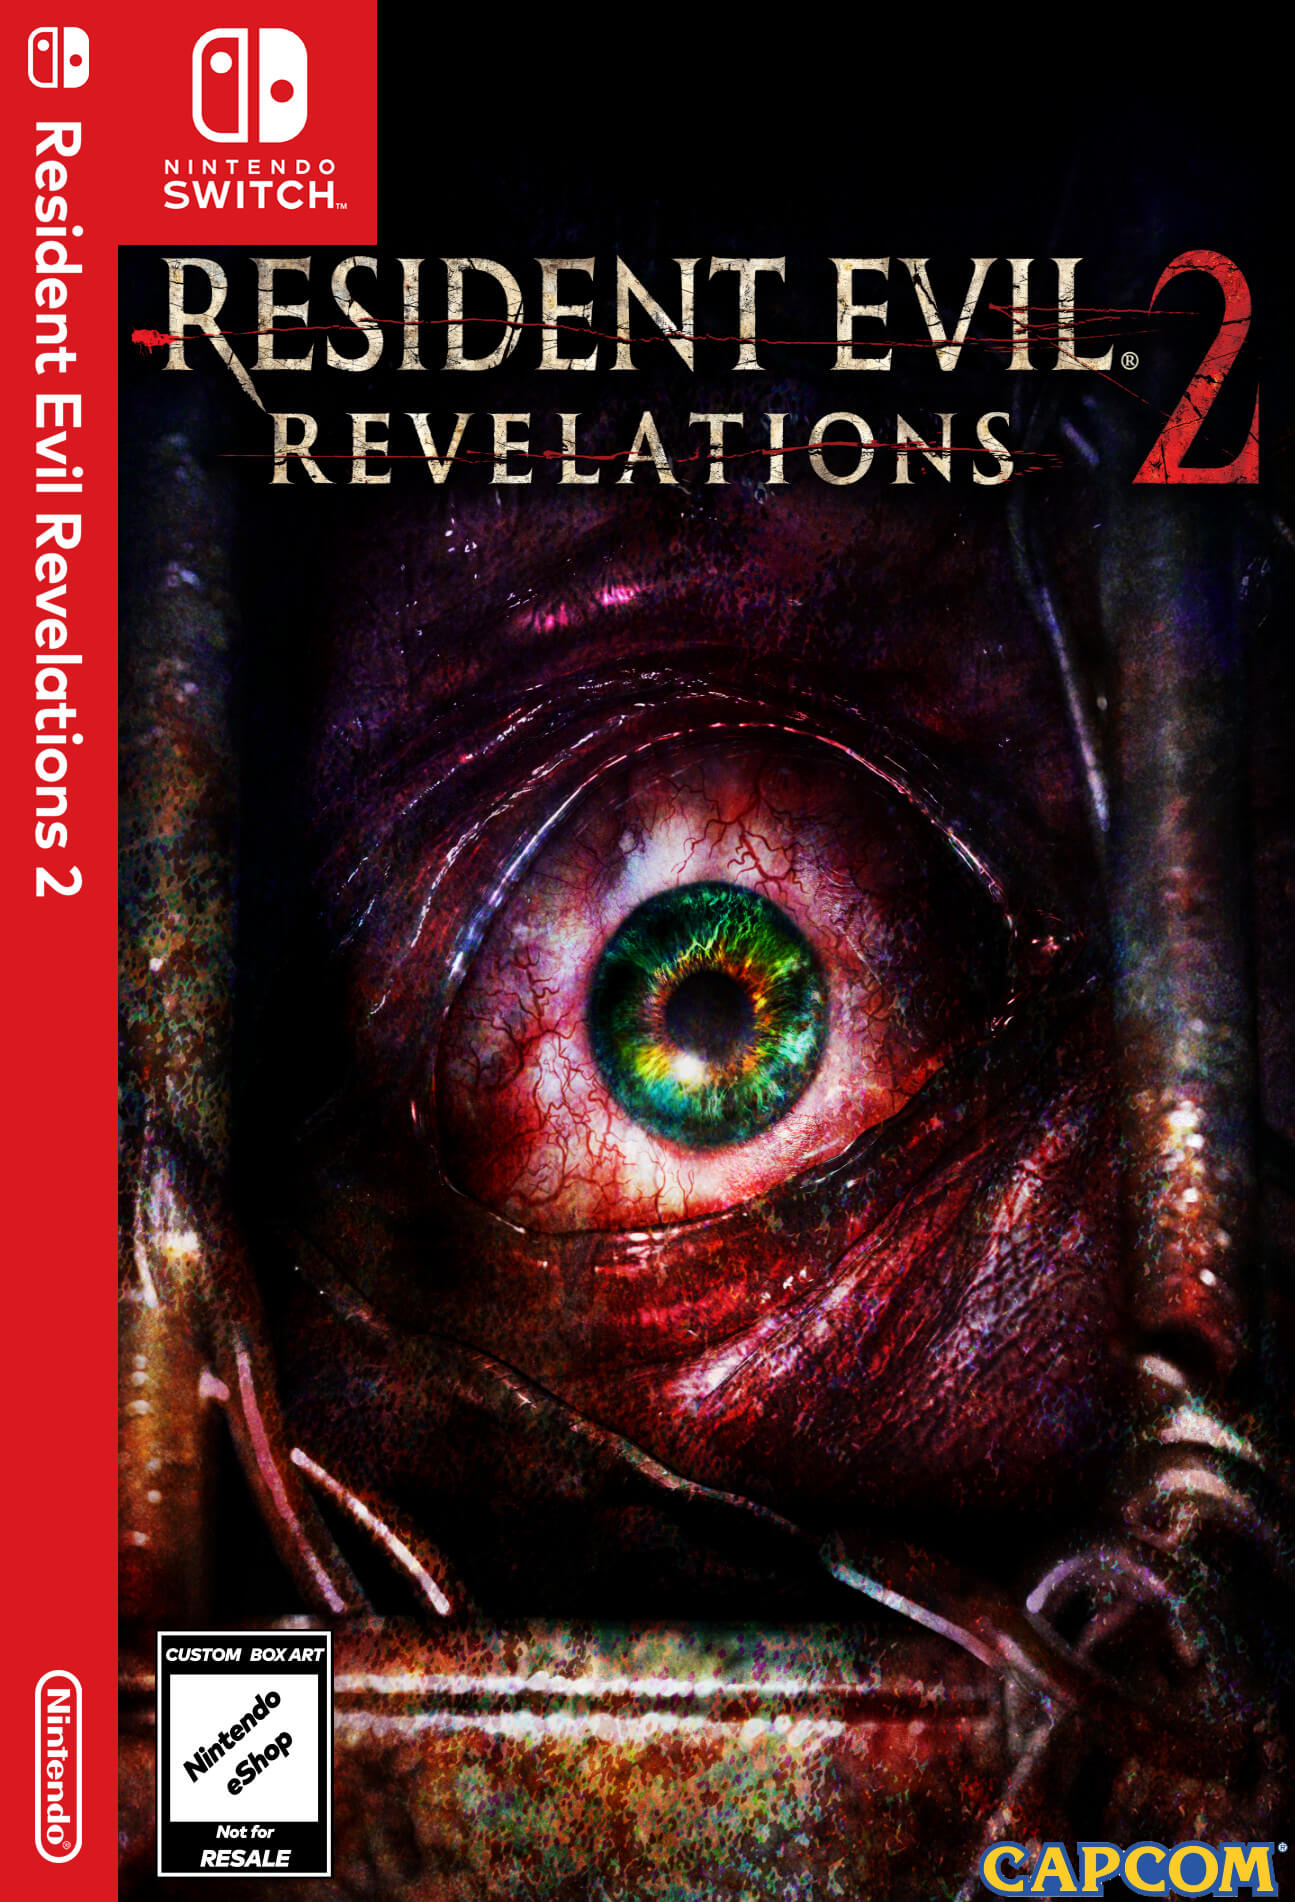 A custom boxart design for Resident Evil: Revelations 2, which never saw a physical release (of it’s own) on Switch